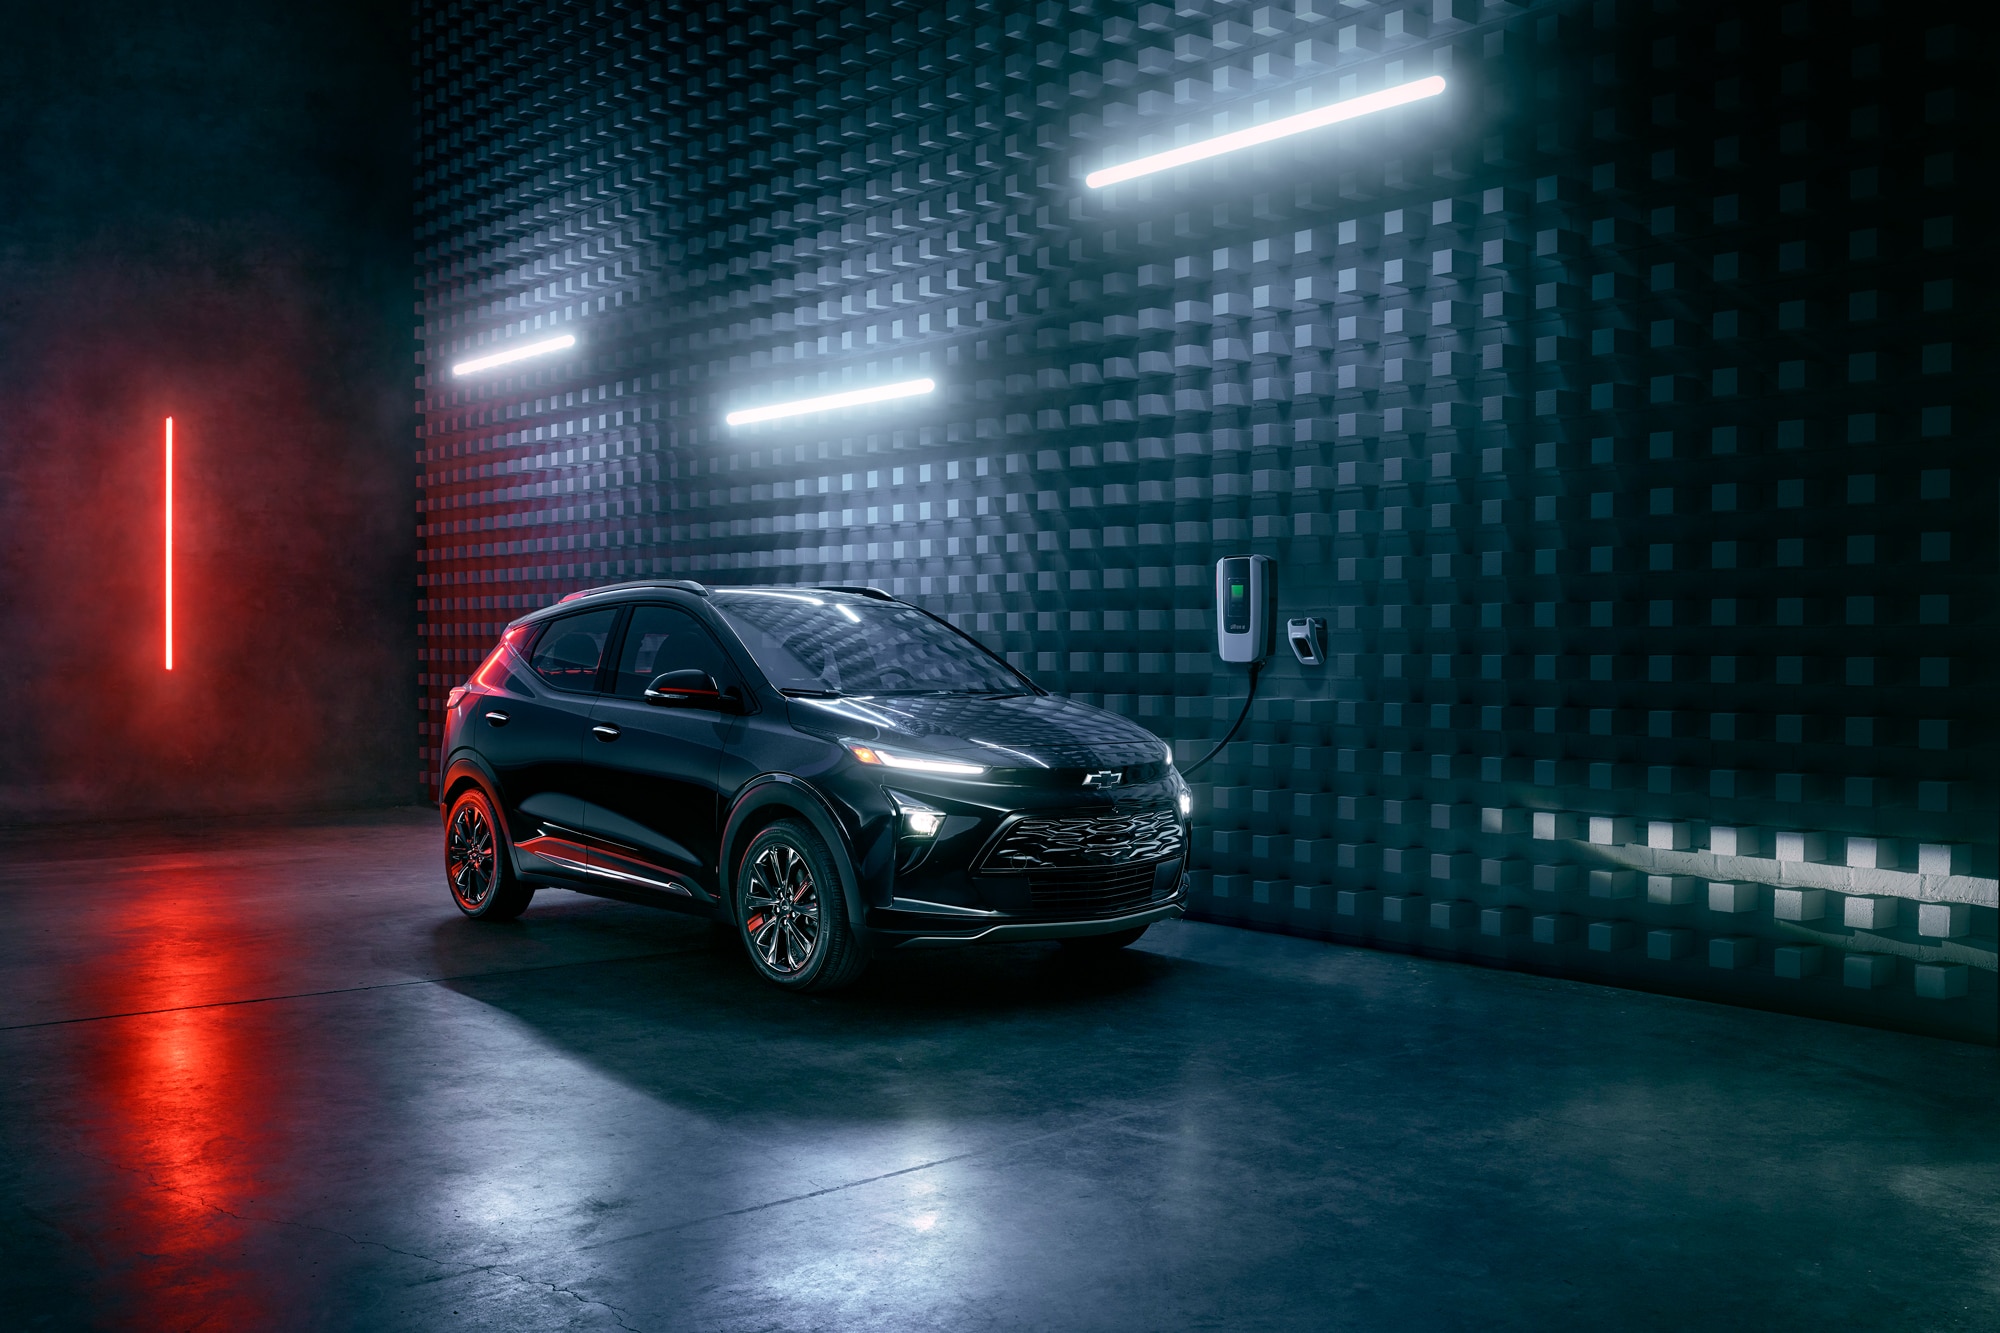 Chevy Bolt EUV getting charged in a dark room